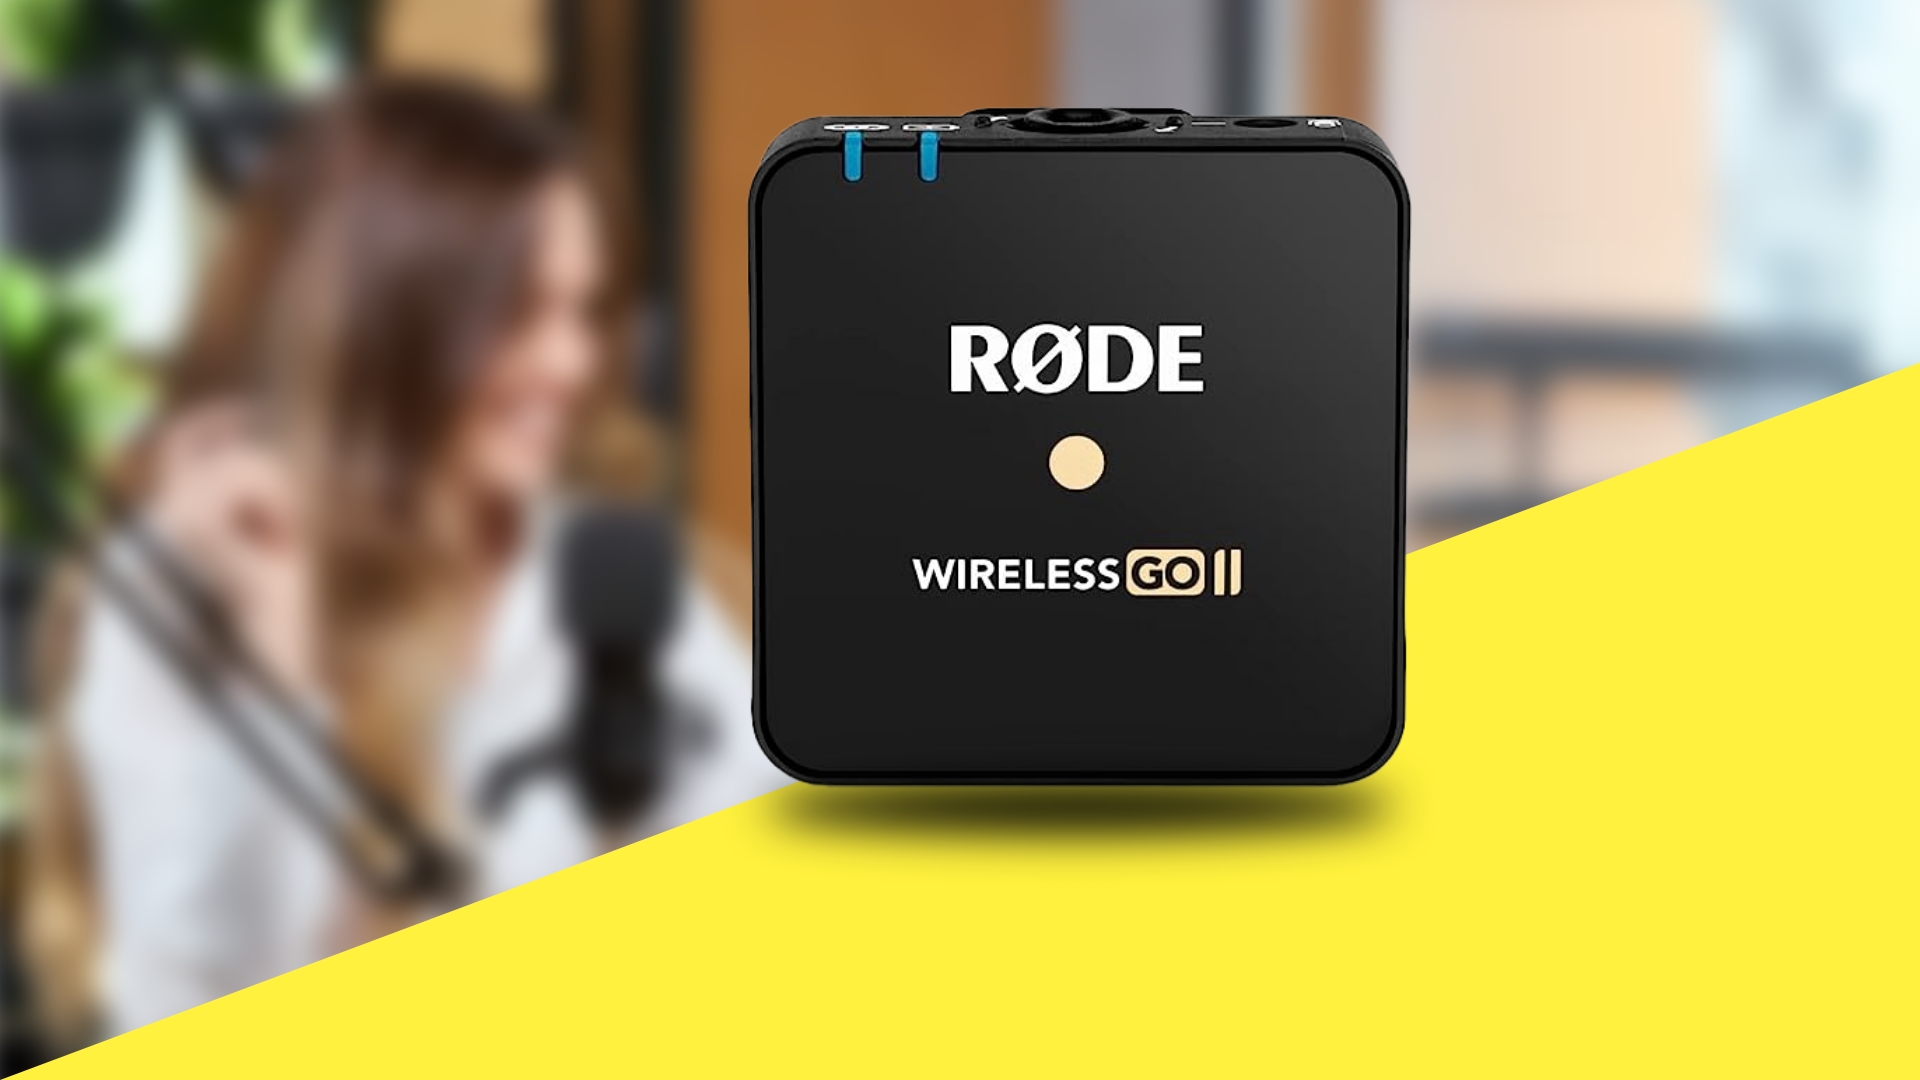 Rode Wireless Go II Dual Channel Review